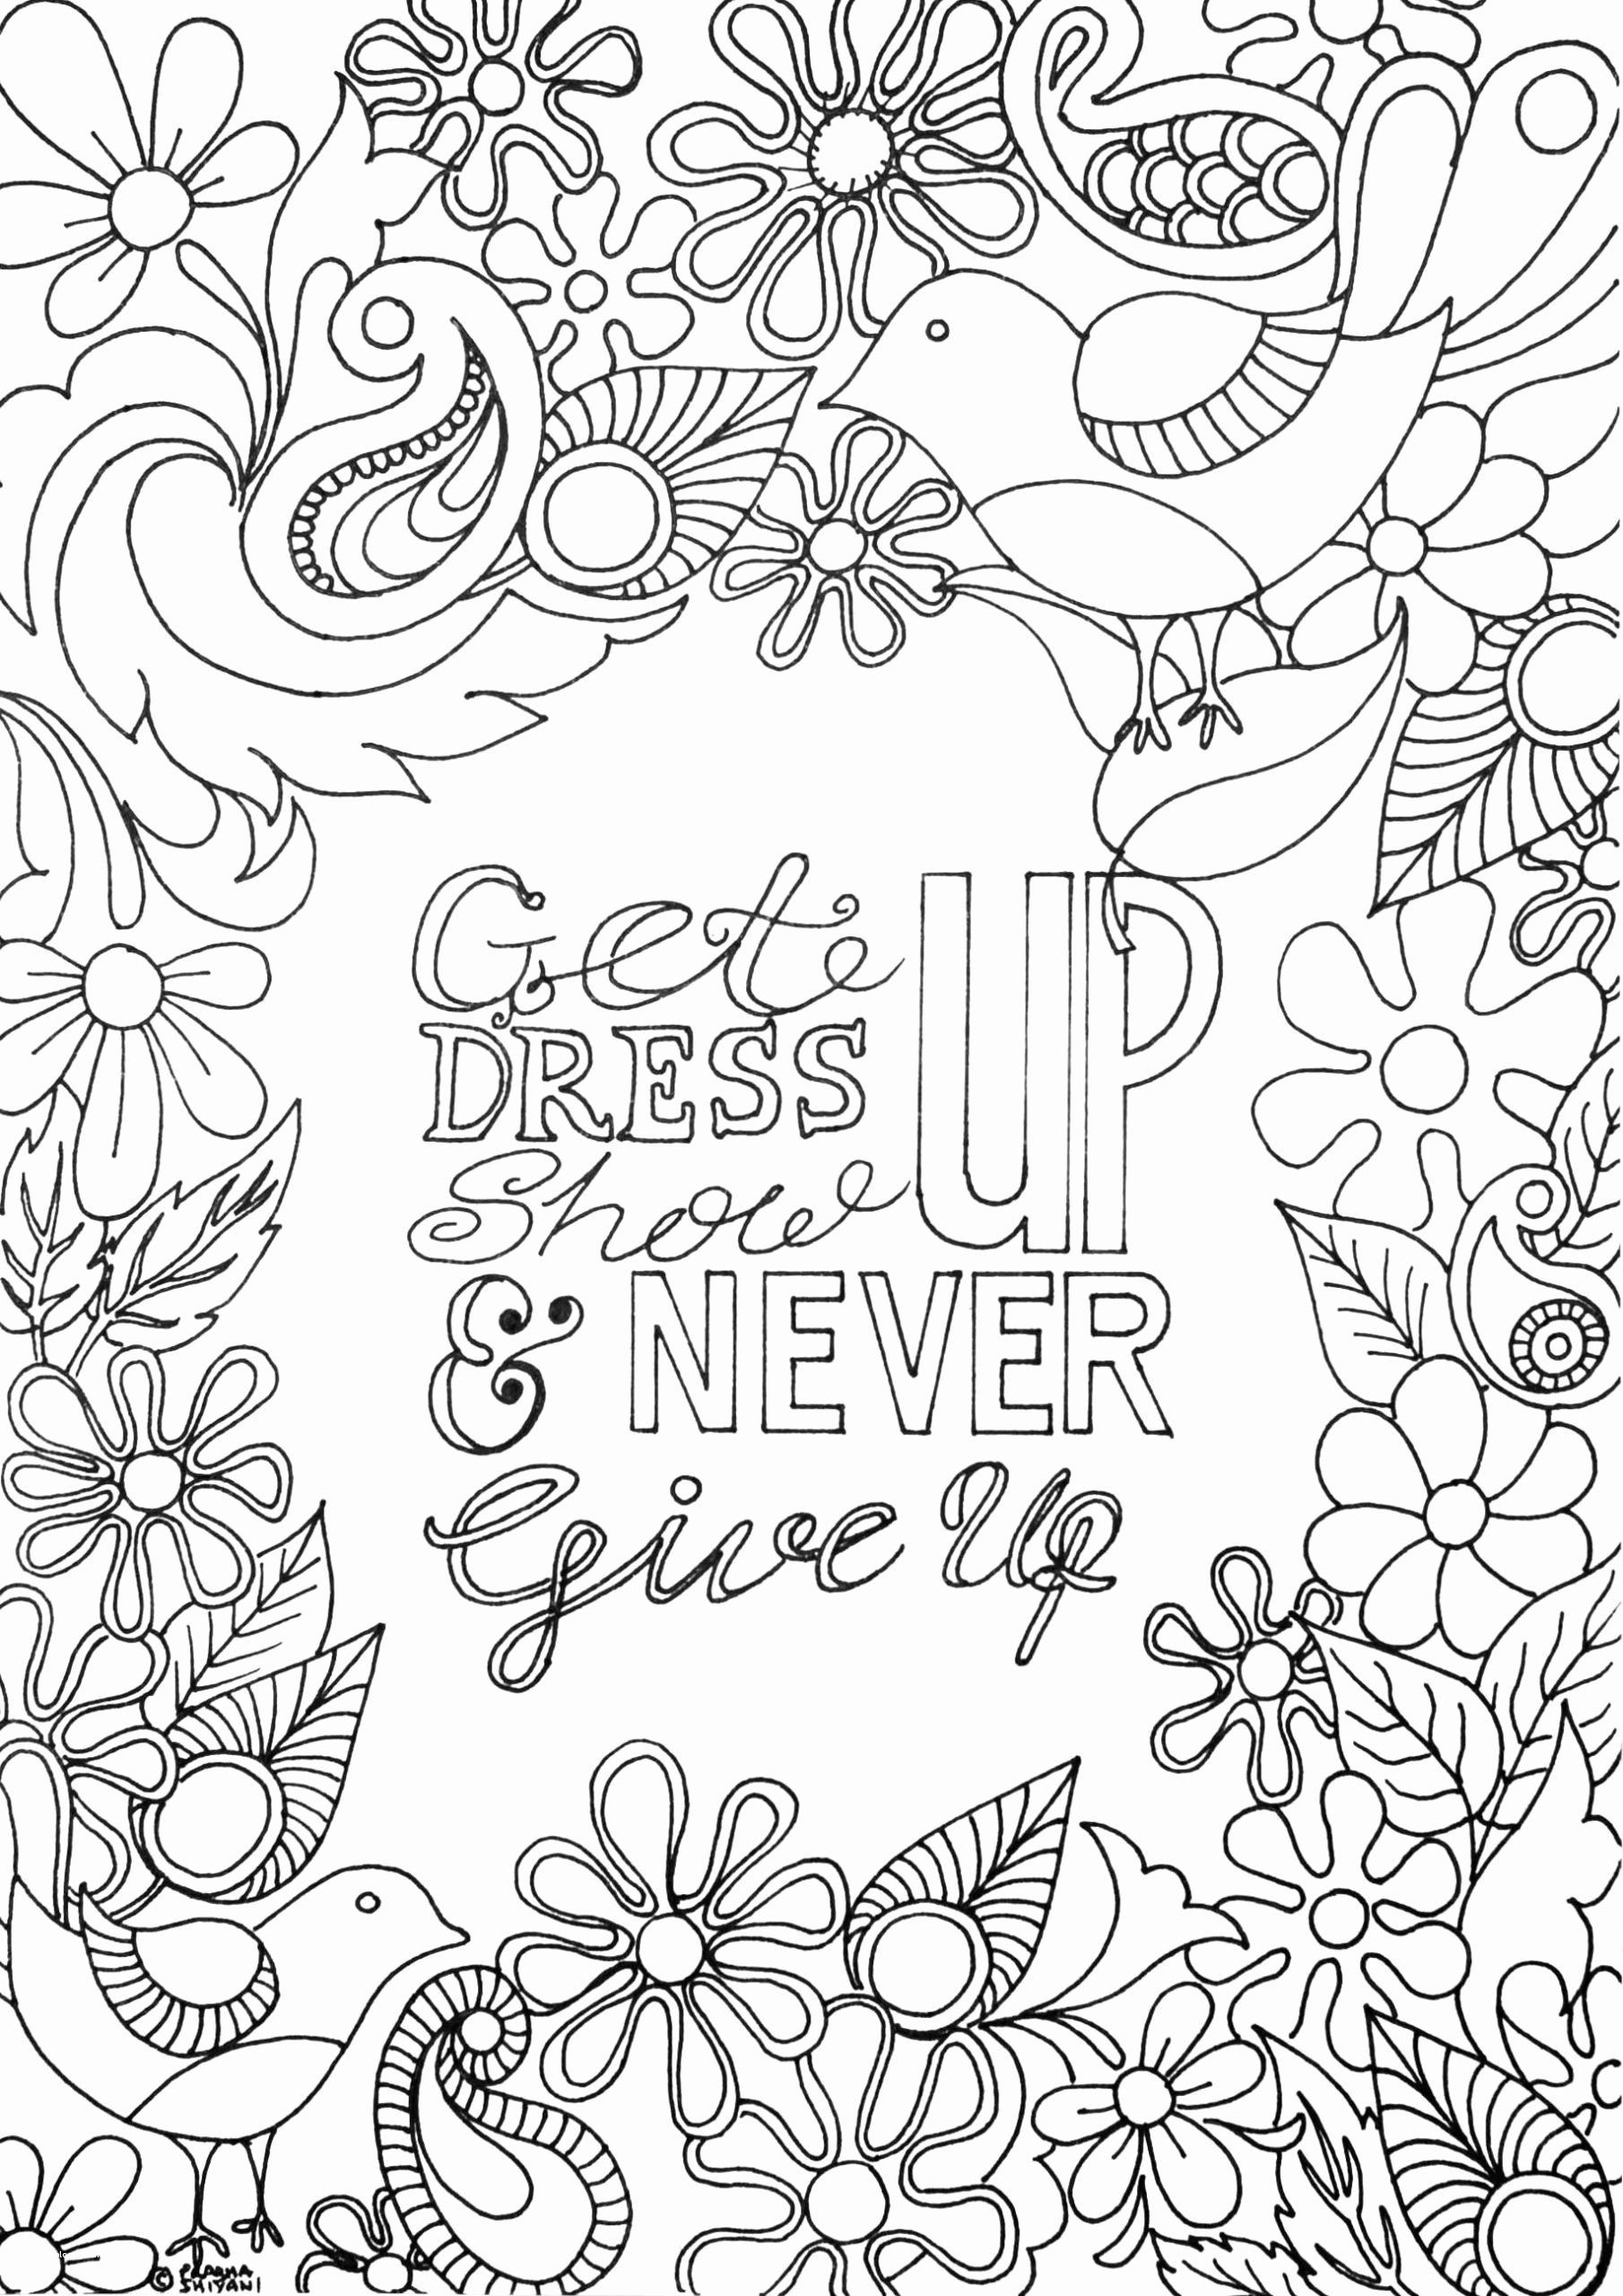 Self esteem Coloring Pages   Coloring Home